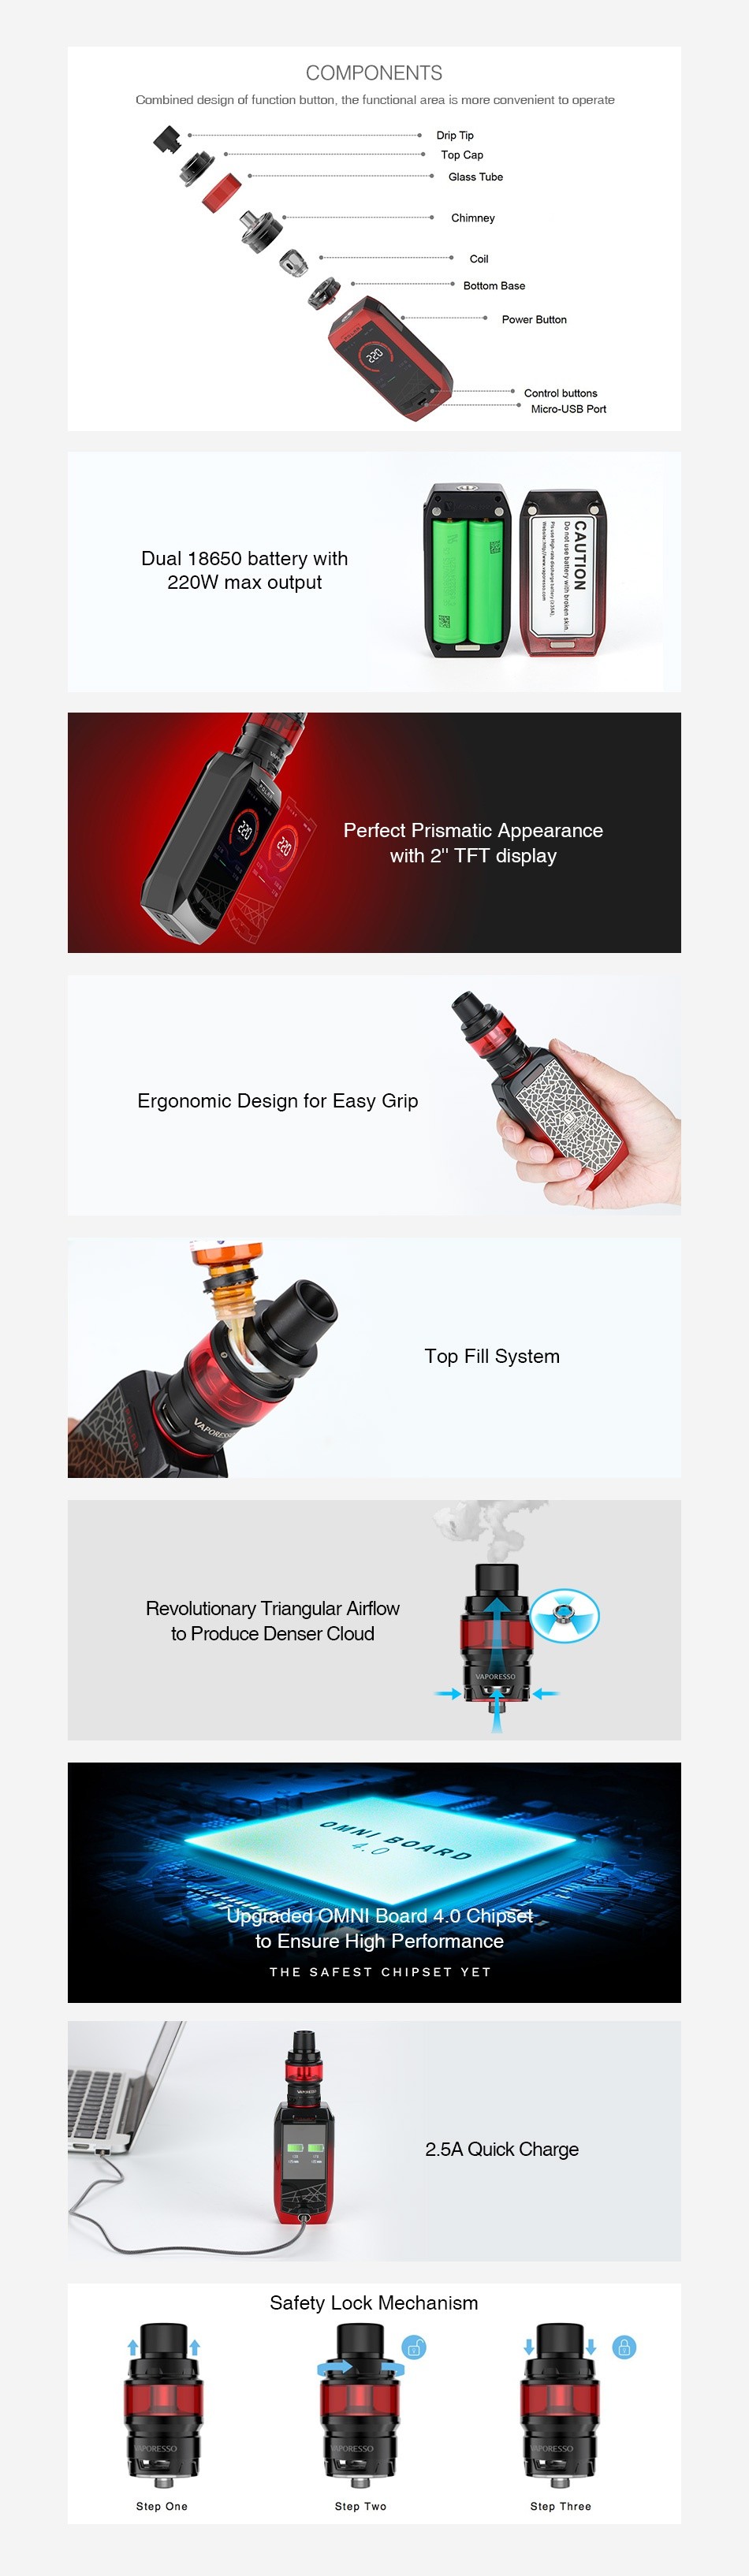 Vaporesso Polar 220W TC Kit with Cascade Baby SE COMPONENTS CombinEr  design nf tiinntinn h  tmmn  the tunrtinnal Dr p Tip Pawar Autk 220W max output 9  Perfect Prismatic Appearance with 2 TFT display Ergonomic Design for Easy Grip Top fill System Revolutionary Triangular Airflow to Produce denser cloud to Ensure High Perfomance THE SAFEST CHIPSET YET Safety Lock Mechanism Step one